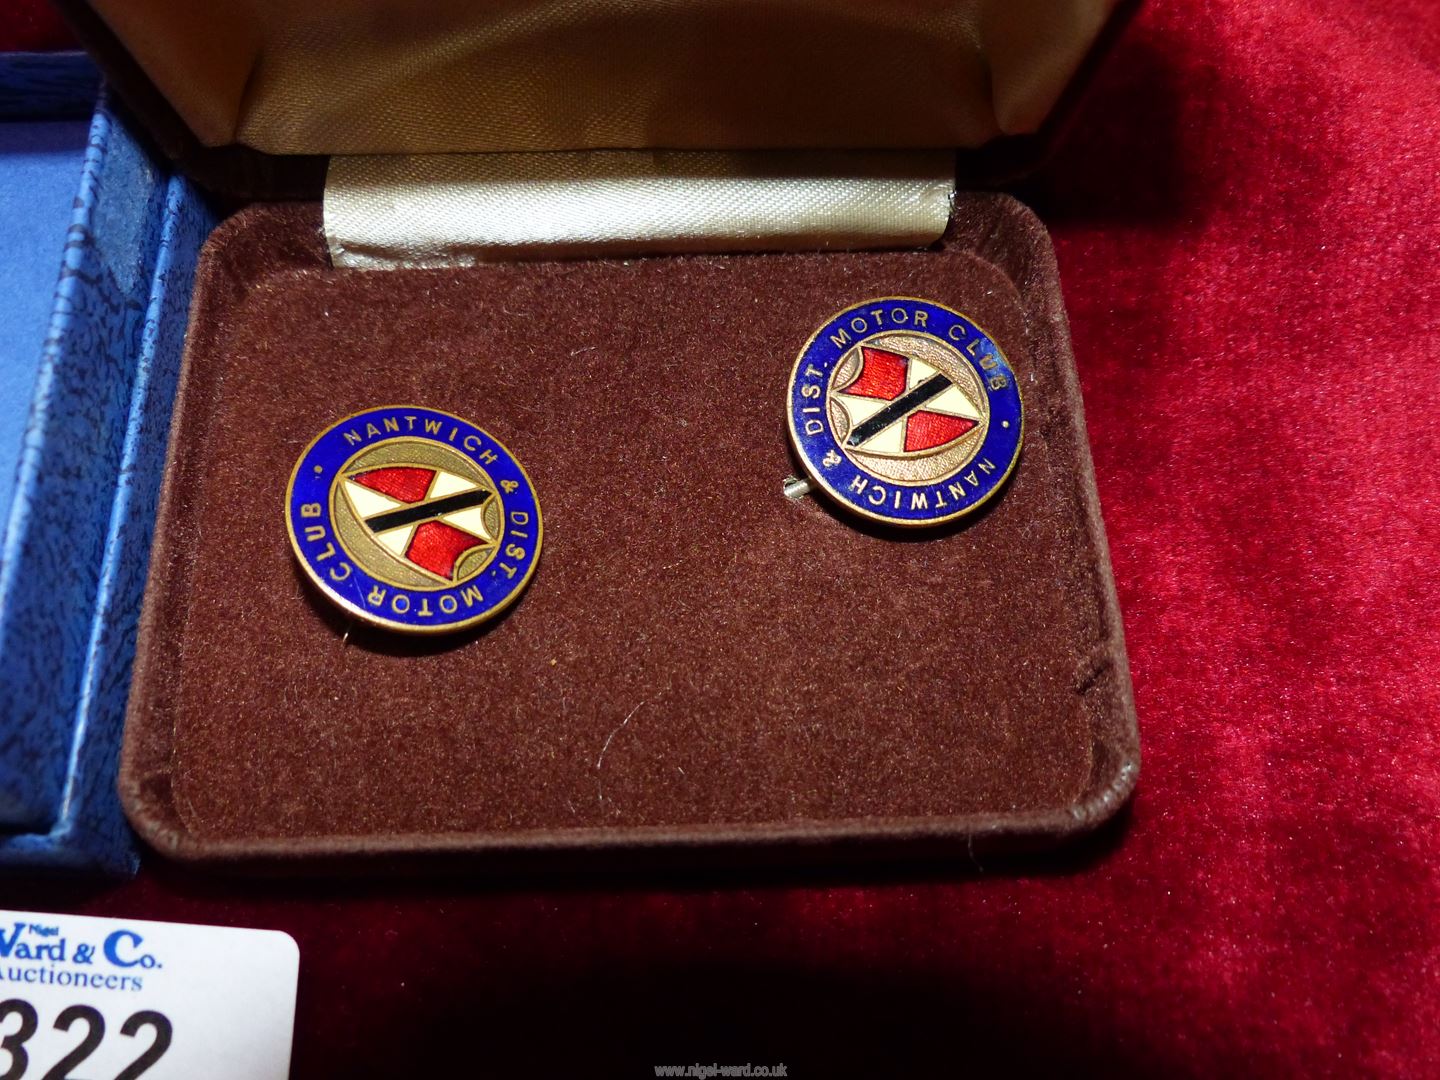 A pair of enamelled pin badges for Nantwich & District Motor Club, - Image 3 of 3